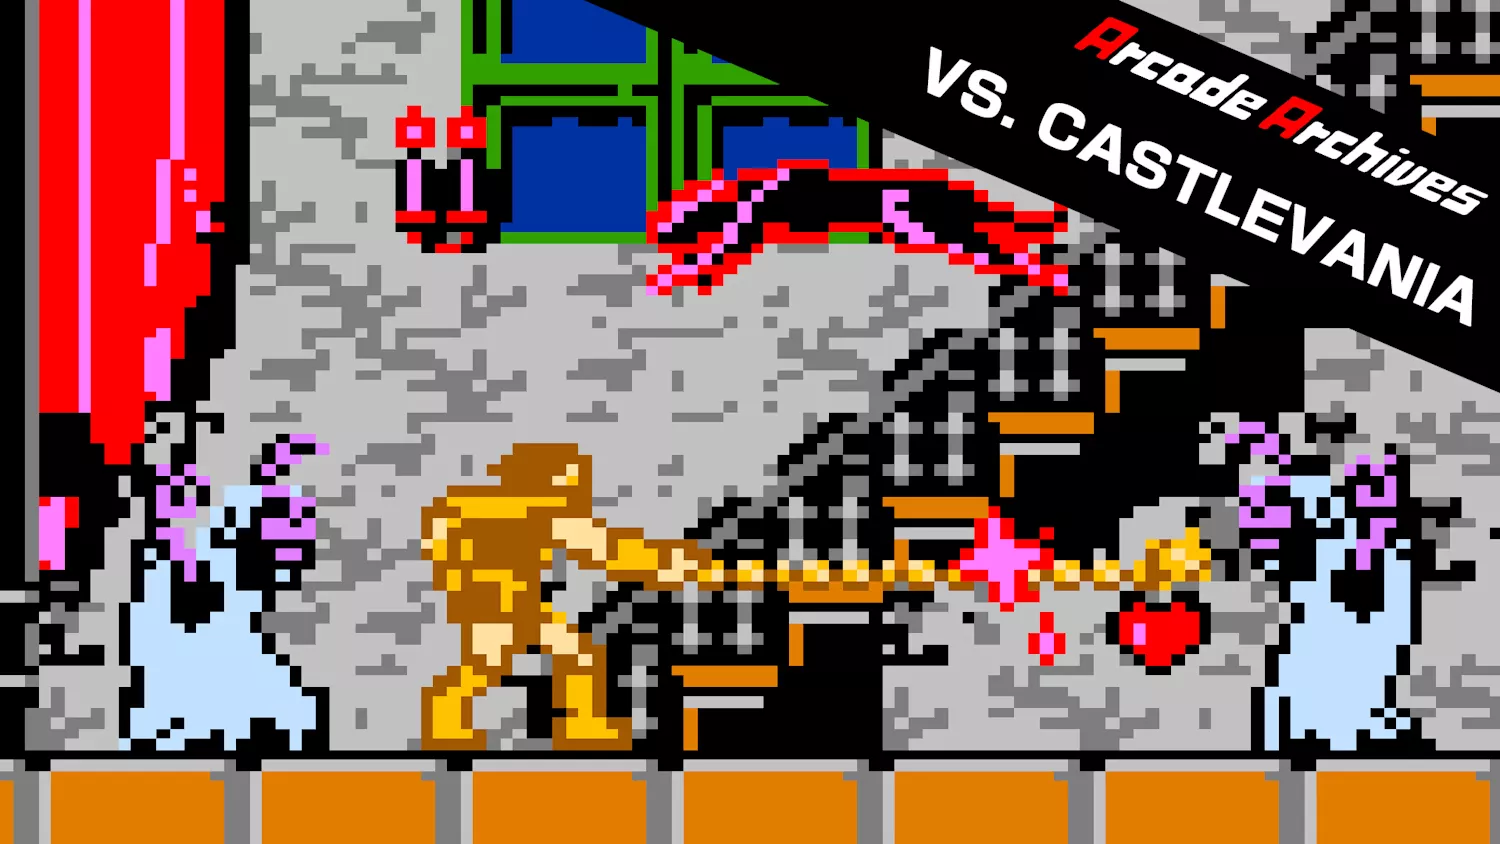 picture[1]-Download Arcade Archives VS. CASTLEVANIA Switch NSP ROM - PANDA-PANDA